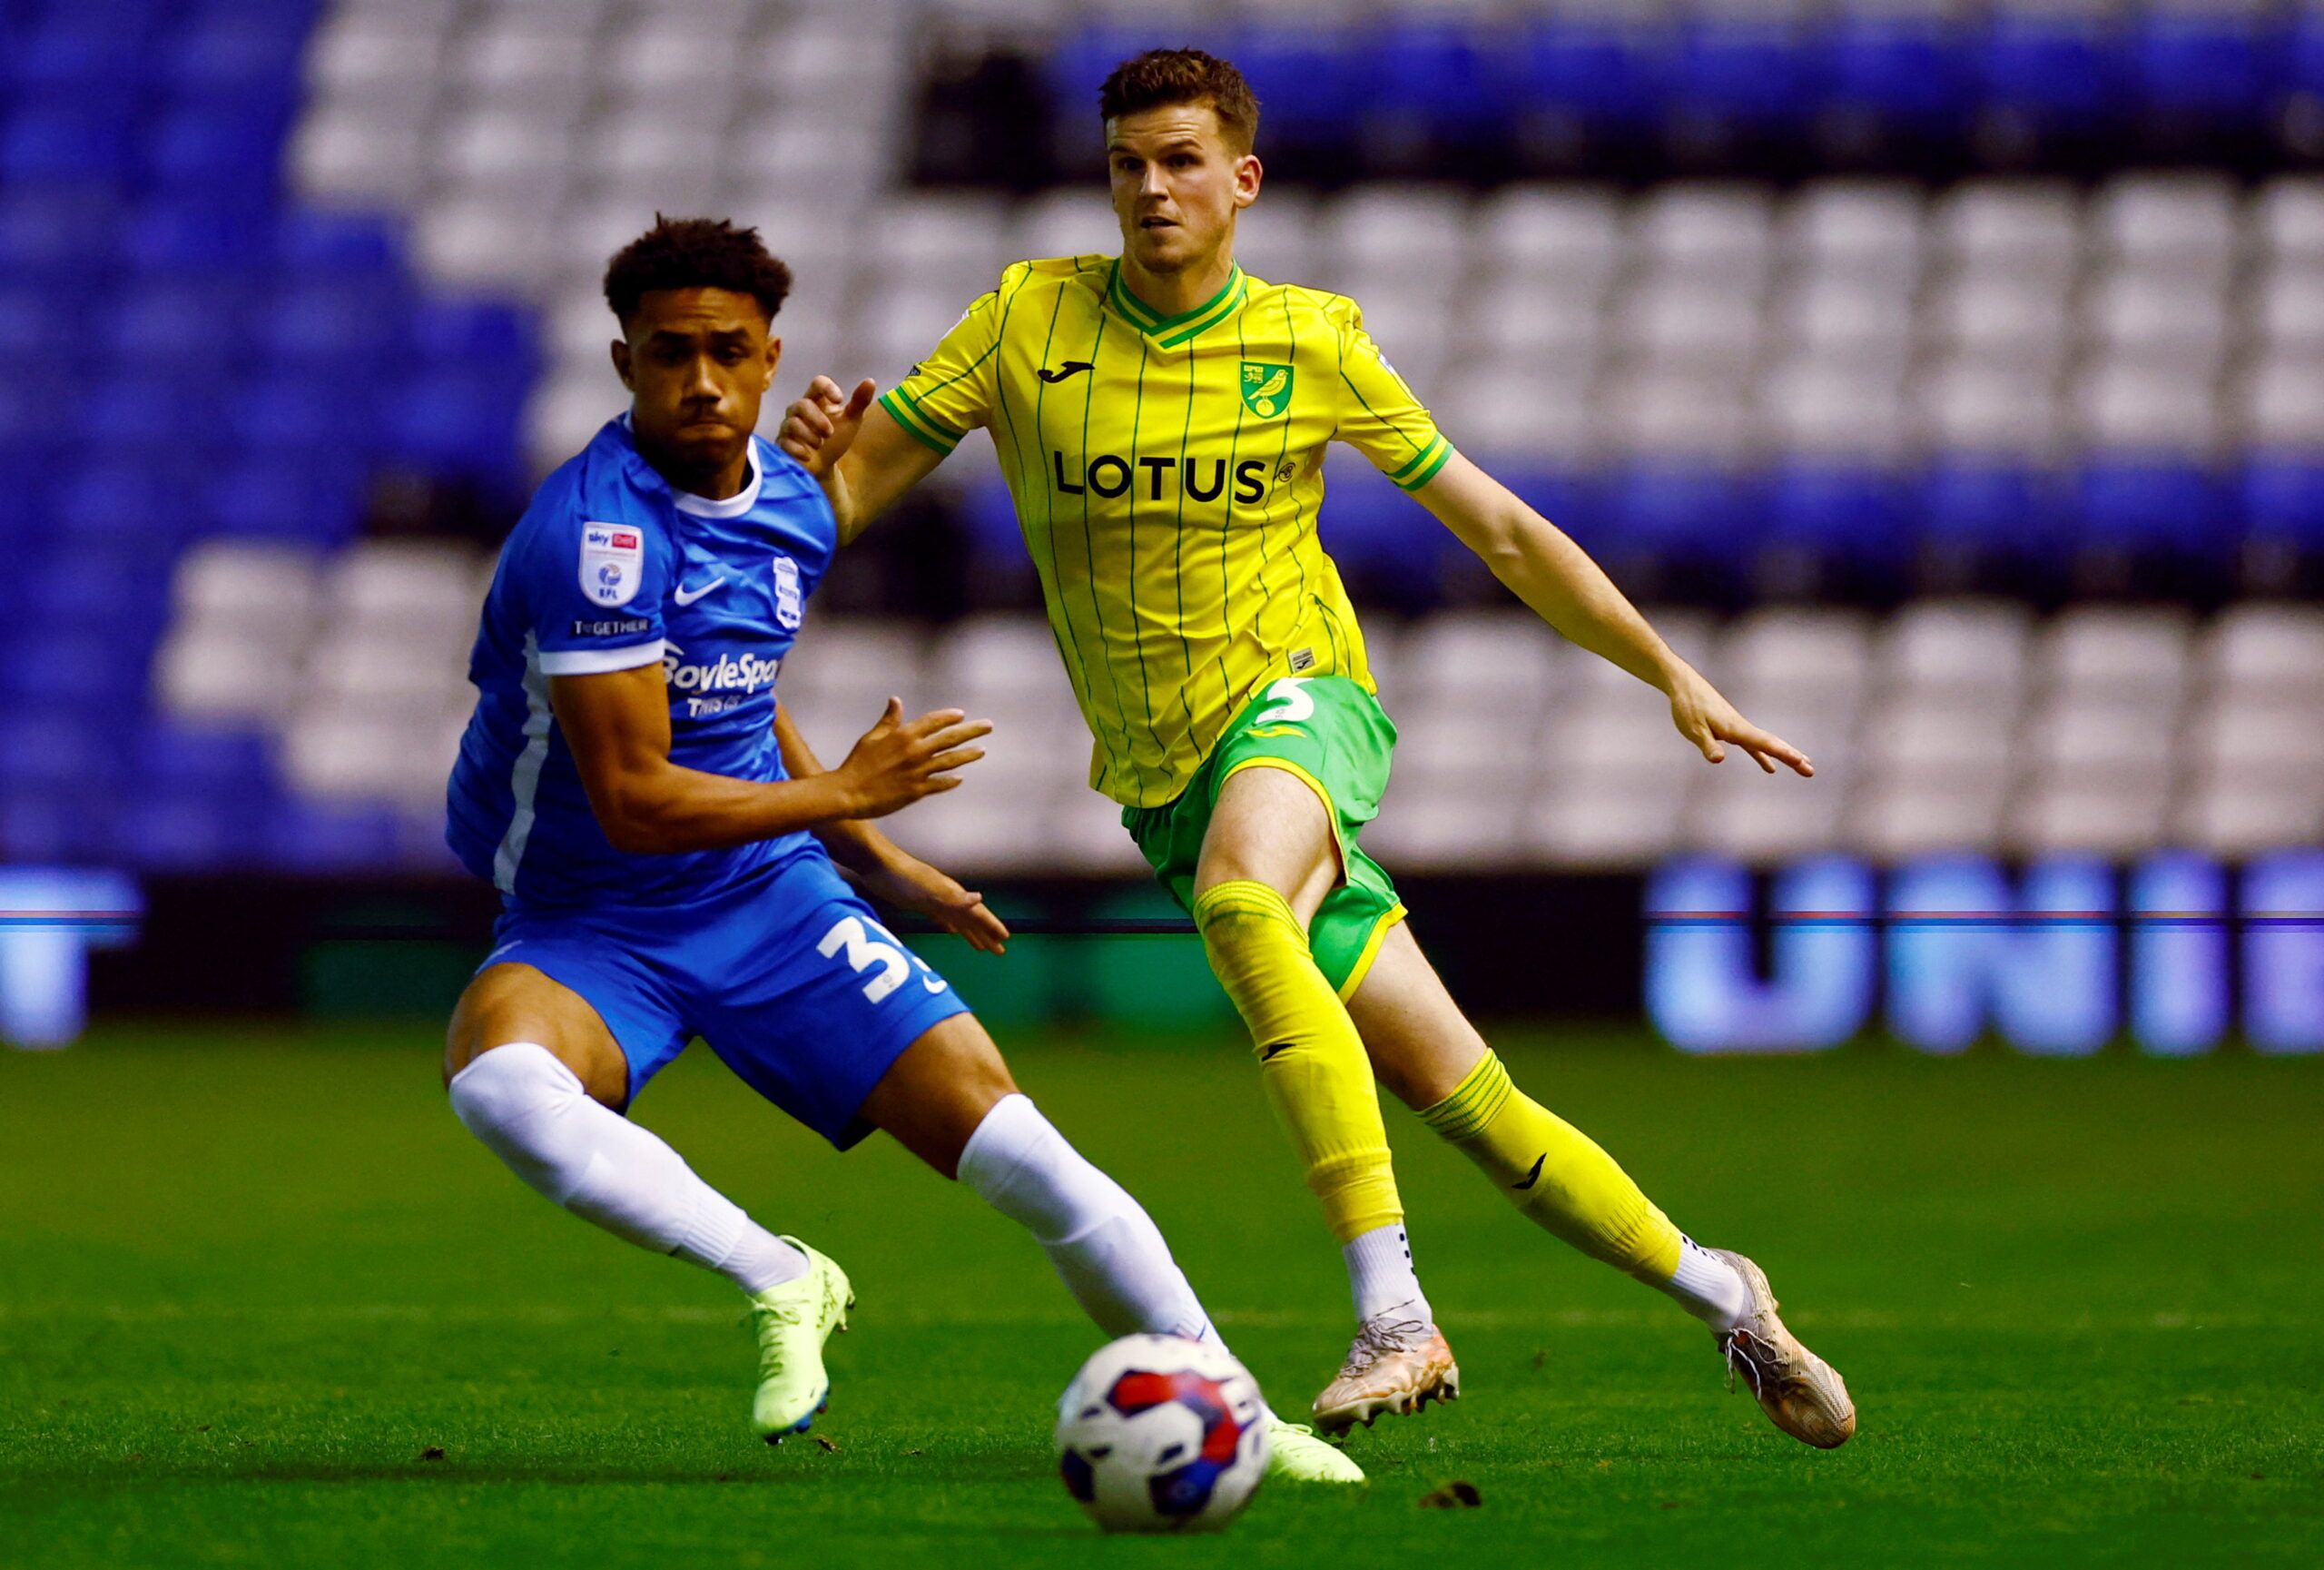 Soccer Football - Championship - Birmingham City v Norwich City - St Andrew's, Birmingham, Britain - August 30, 2022 Norwich City's Samuel Byram in action with Birmingham City's George Hall  Action Images/Andrew Boyers  EDITORIAL USE ONLY. No use with unauthorized audio, video, data, fixture lists, club/league logos or 